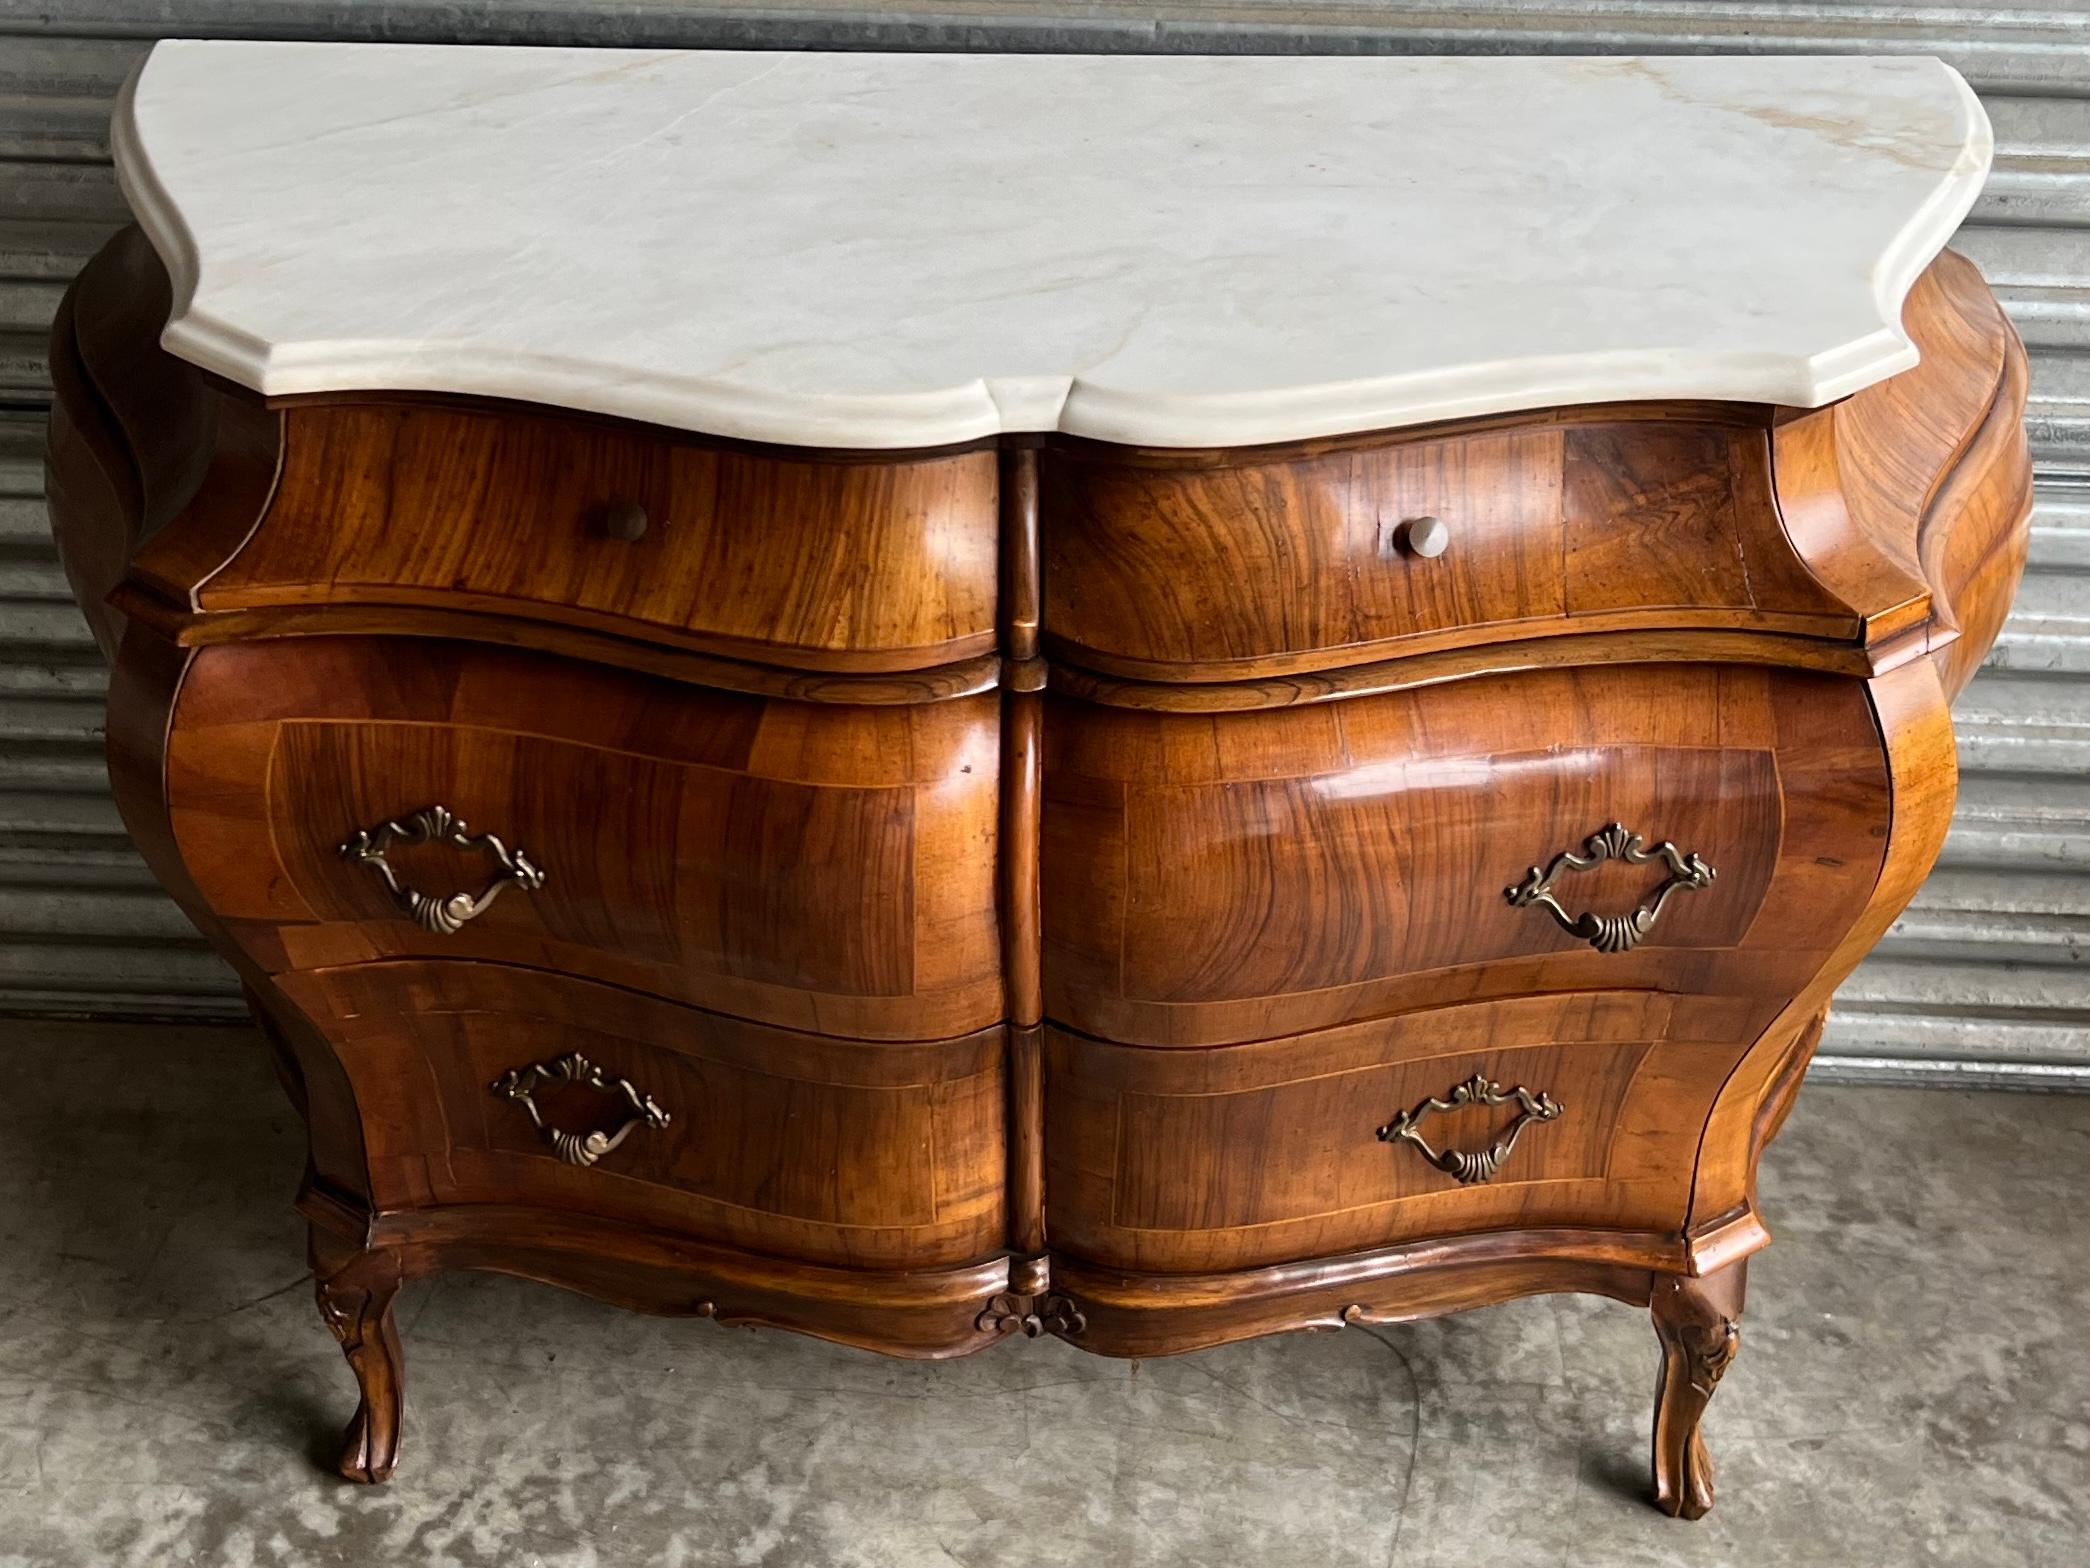 20th Century 1950S Italian Burl Walnut Inlaid French Louis XV Style Marble Top Chests, Pair